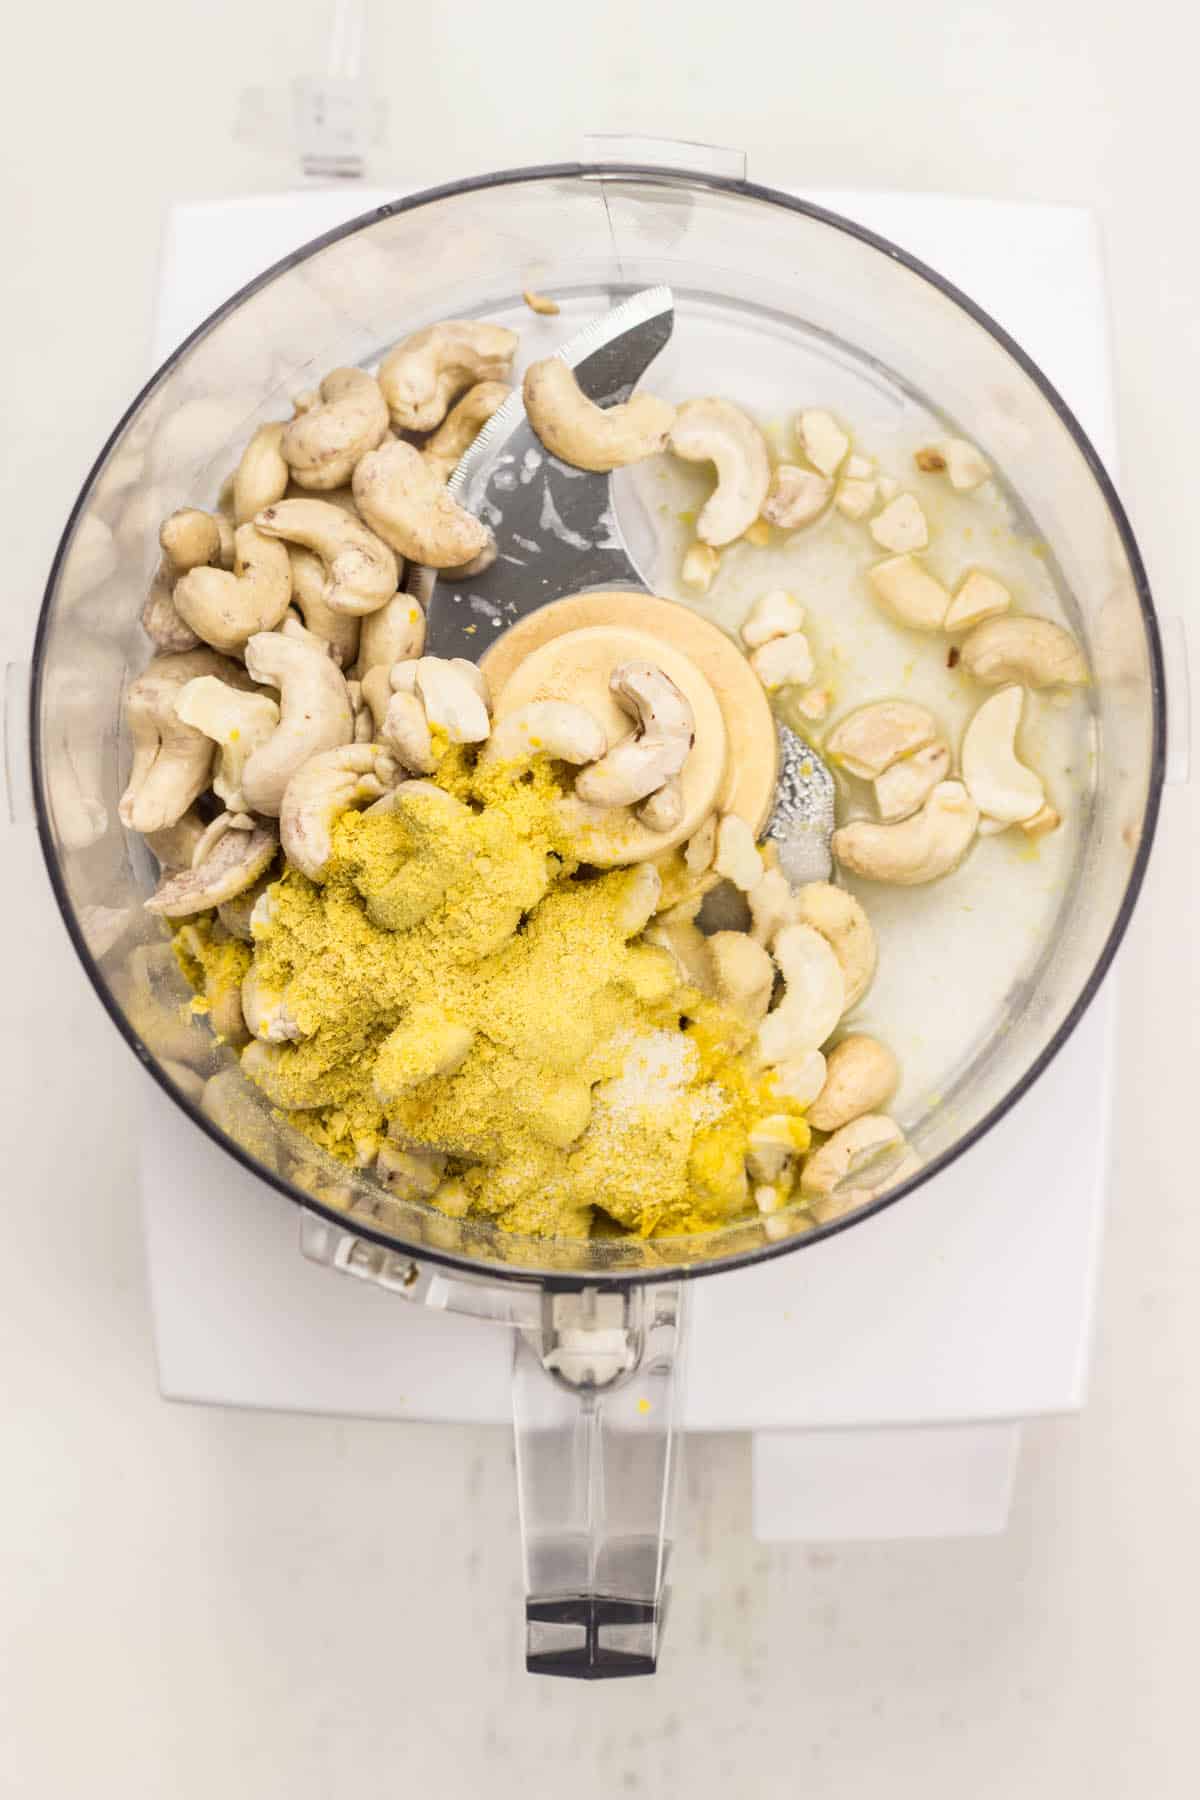 Top view of ingredients to make Cashew Cream Cheese in food processor before blending.